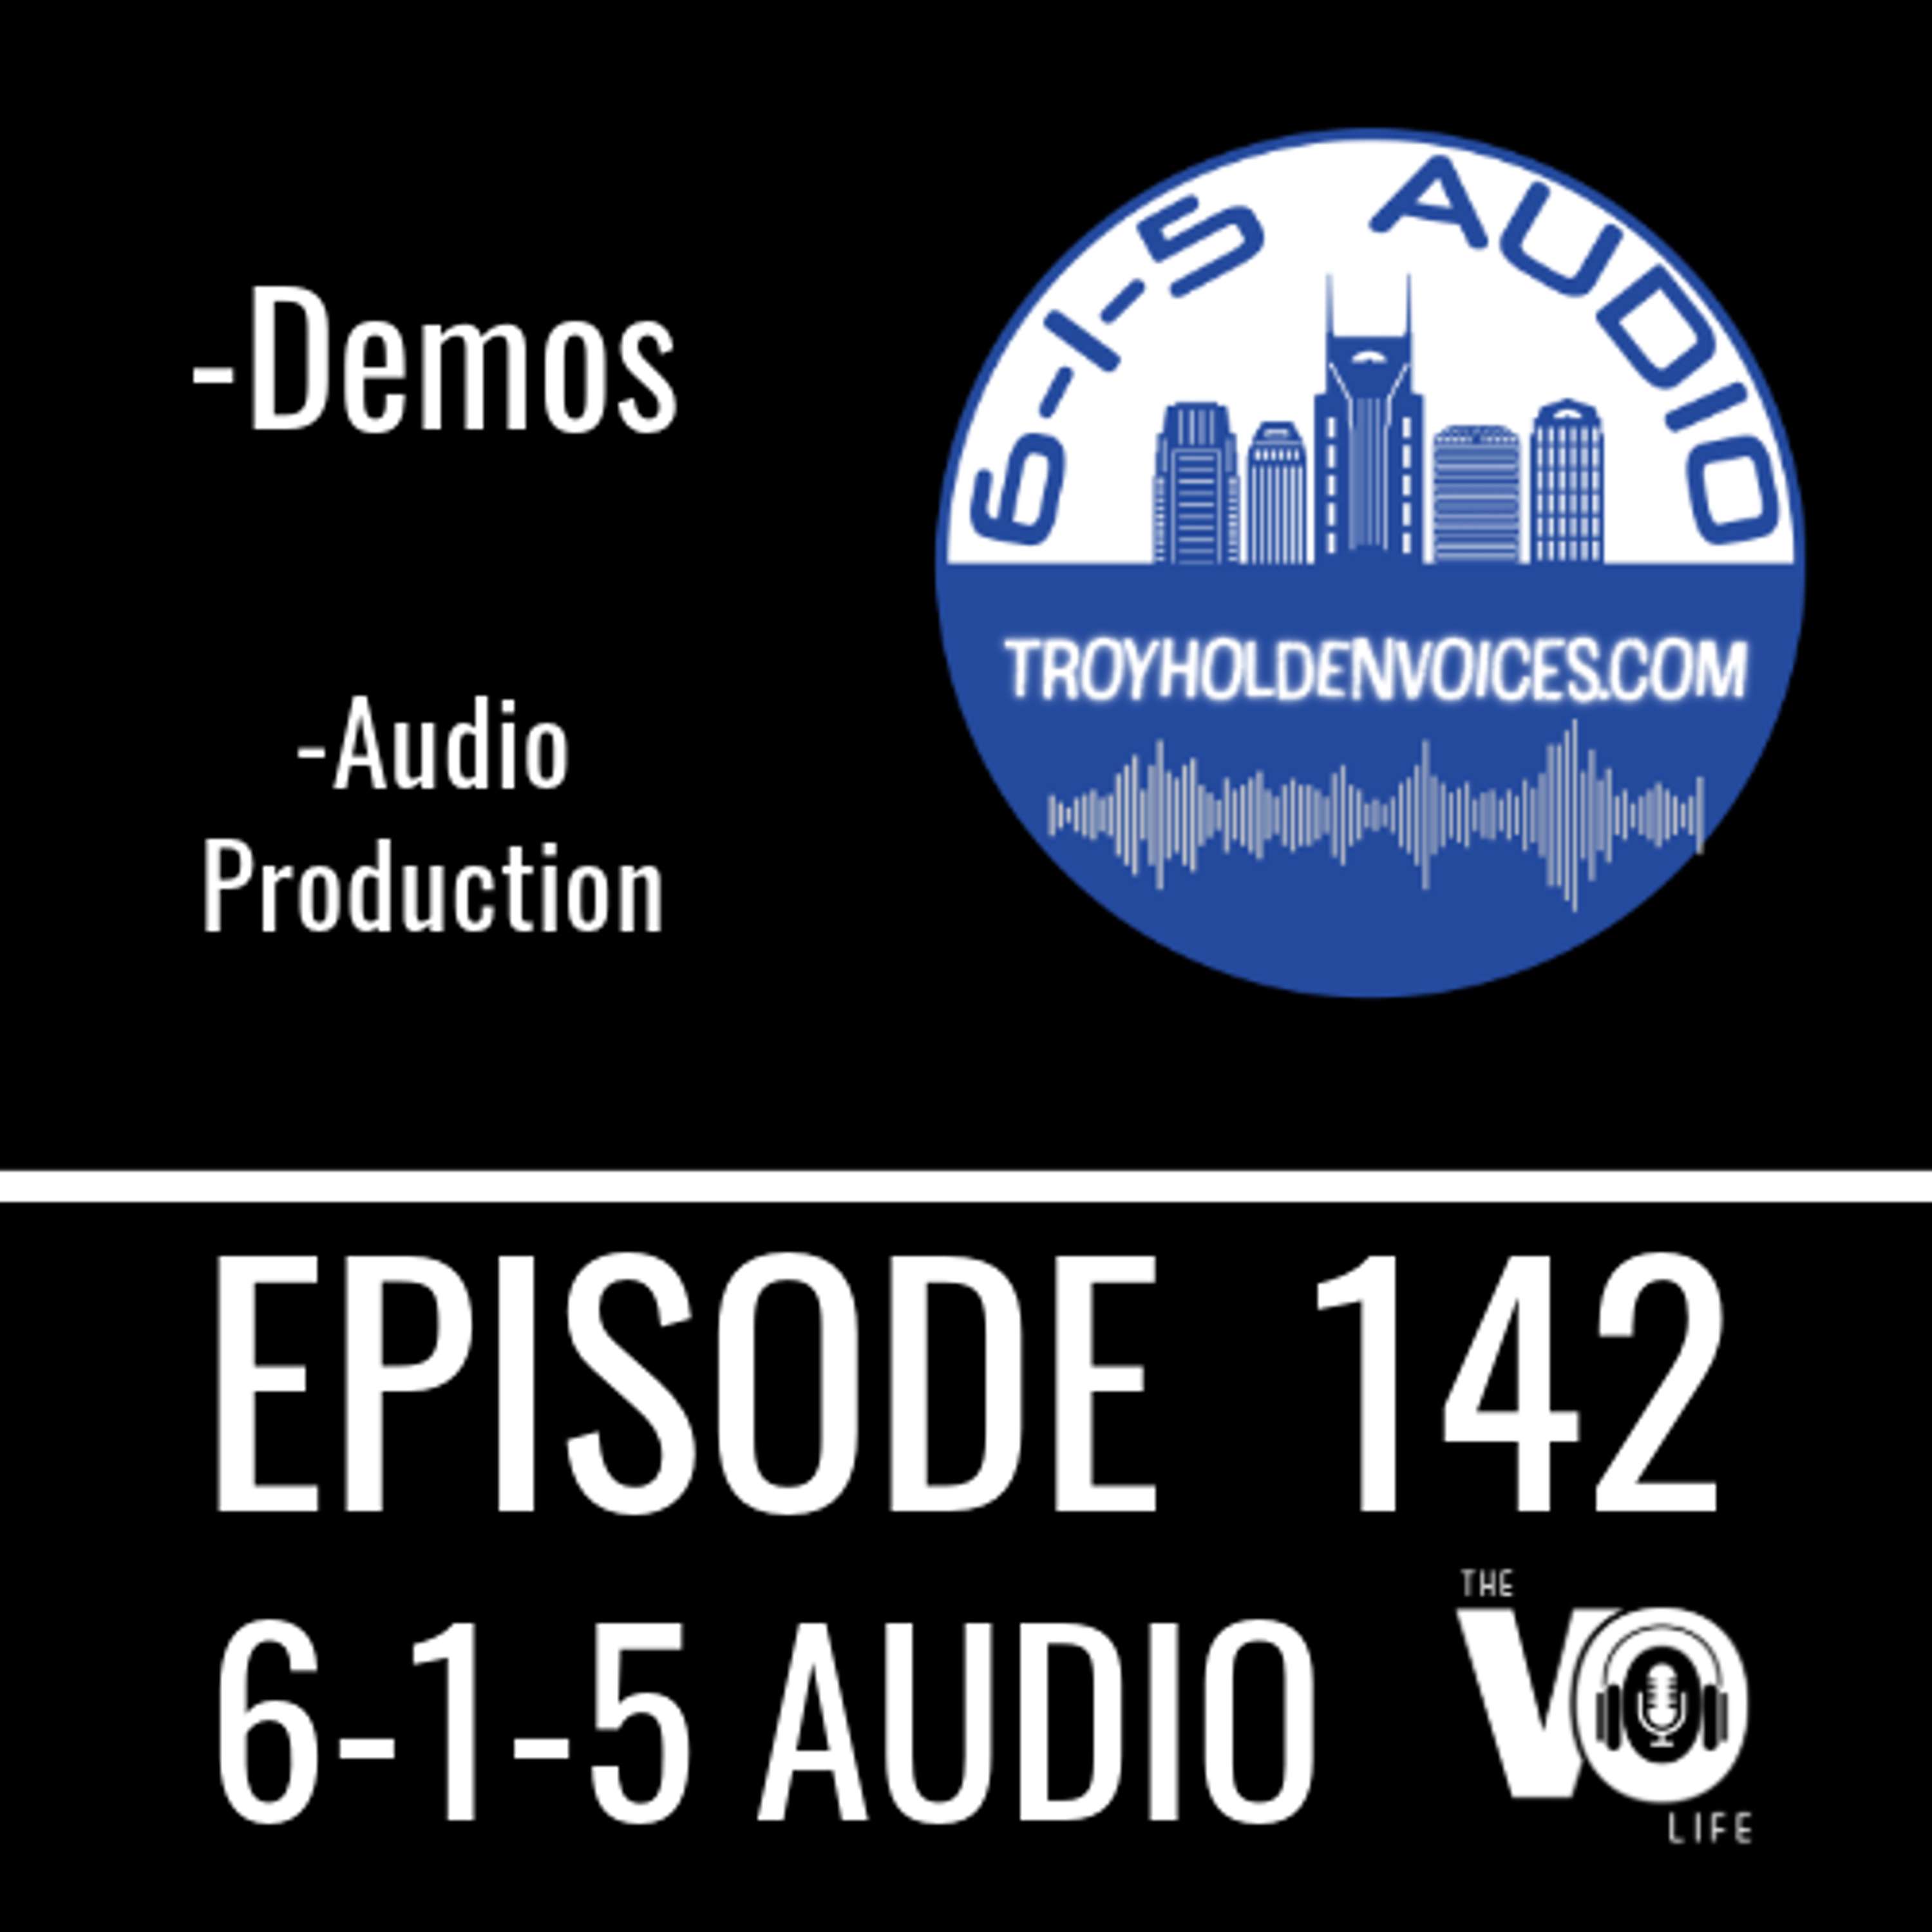 EP 142 - Audio Production and Demos  6-1-5 AUDIO